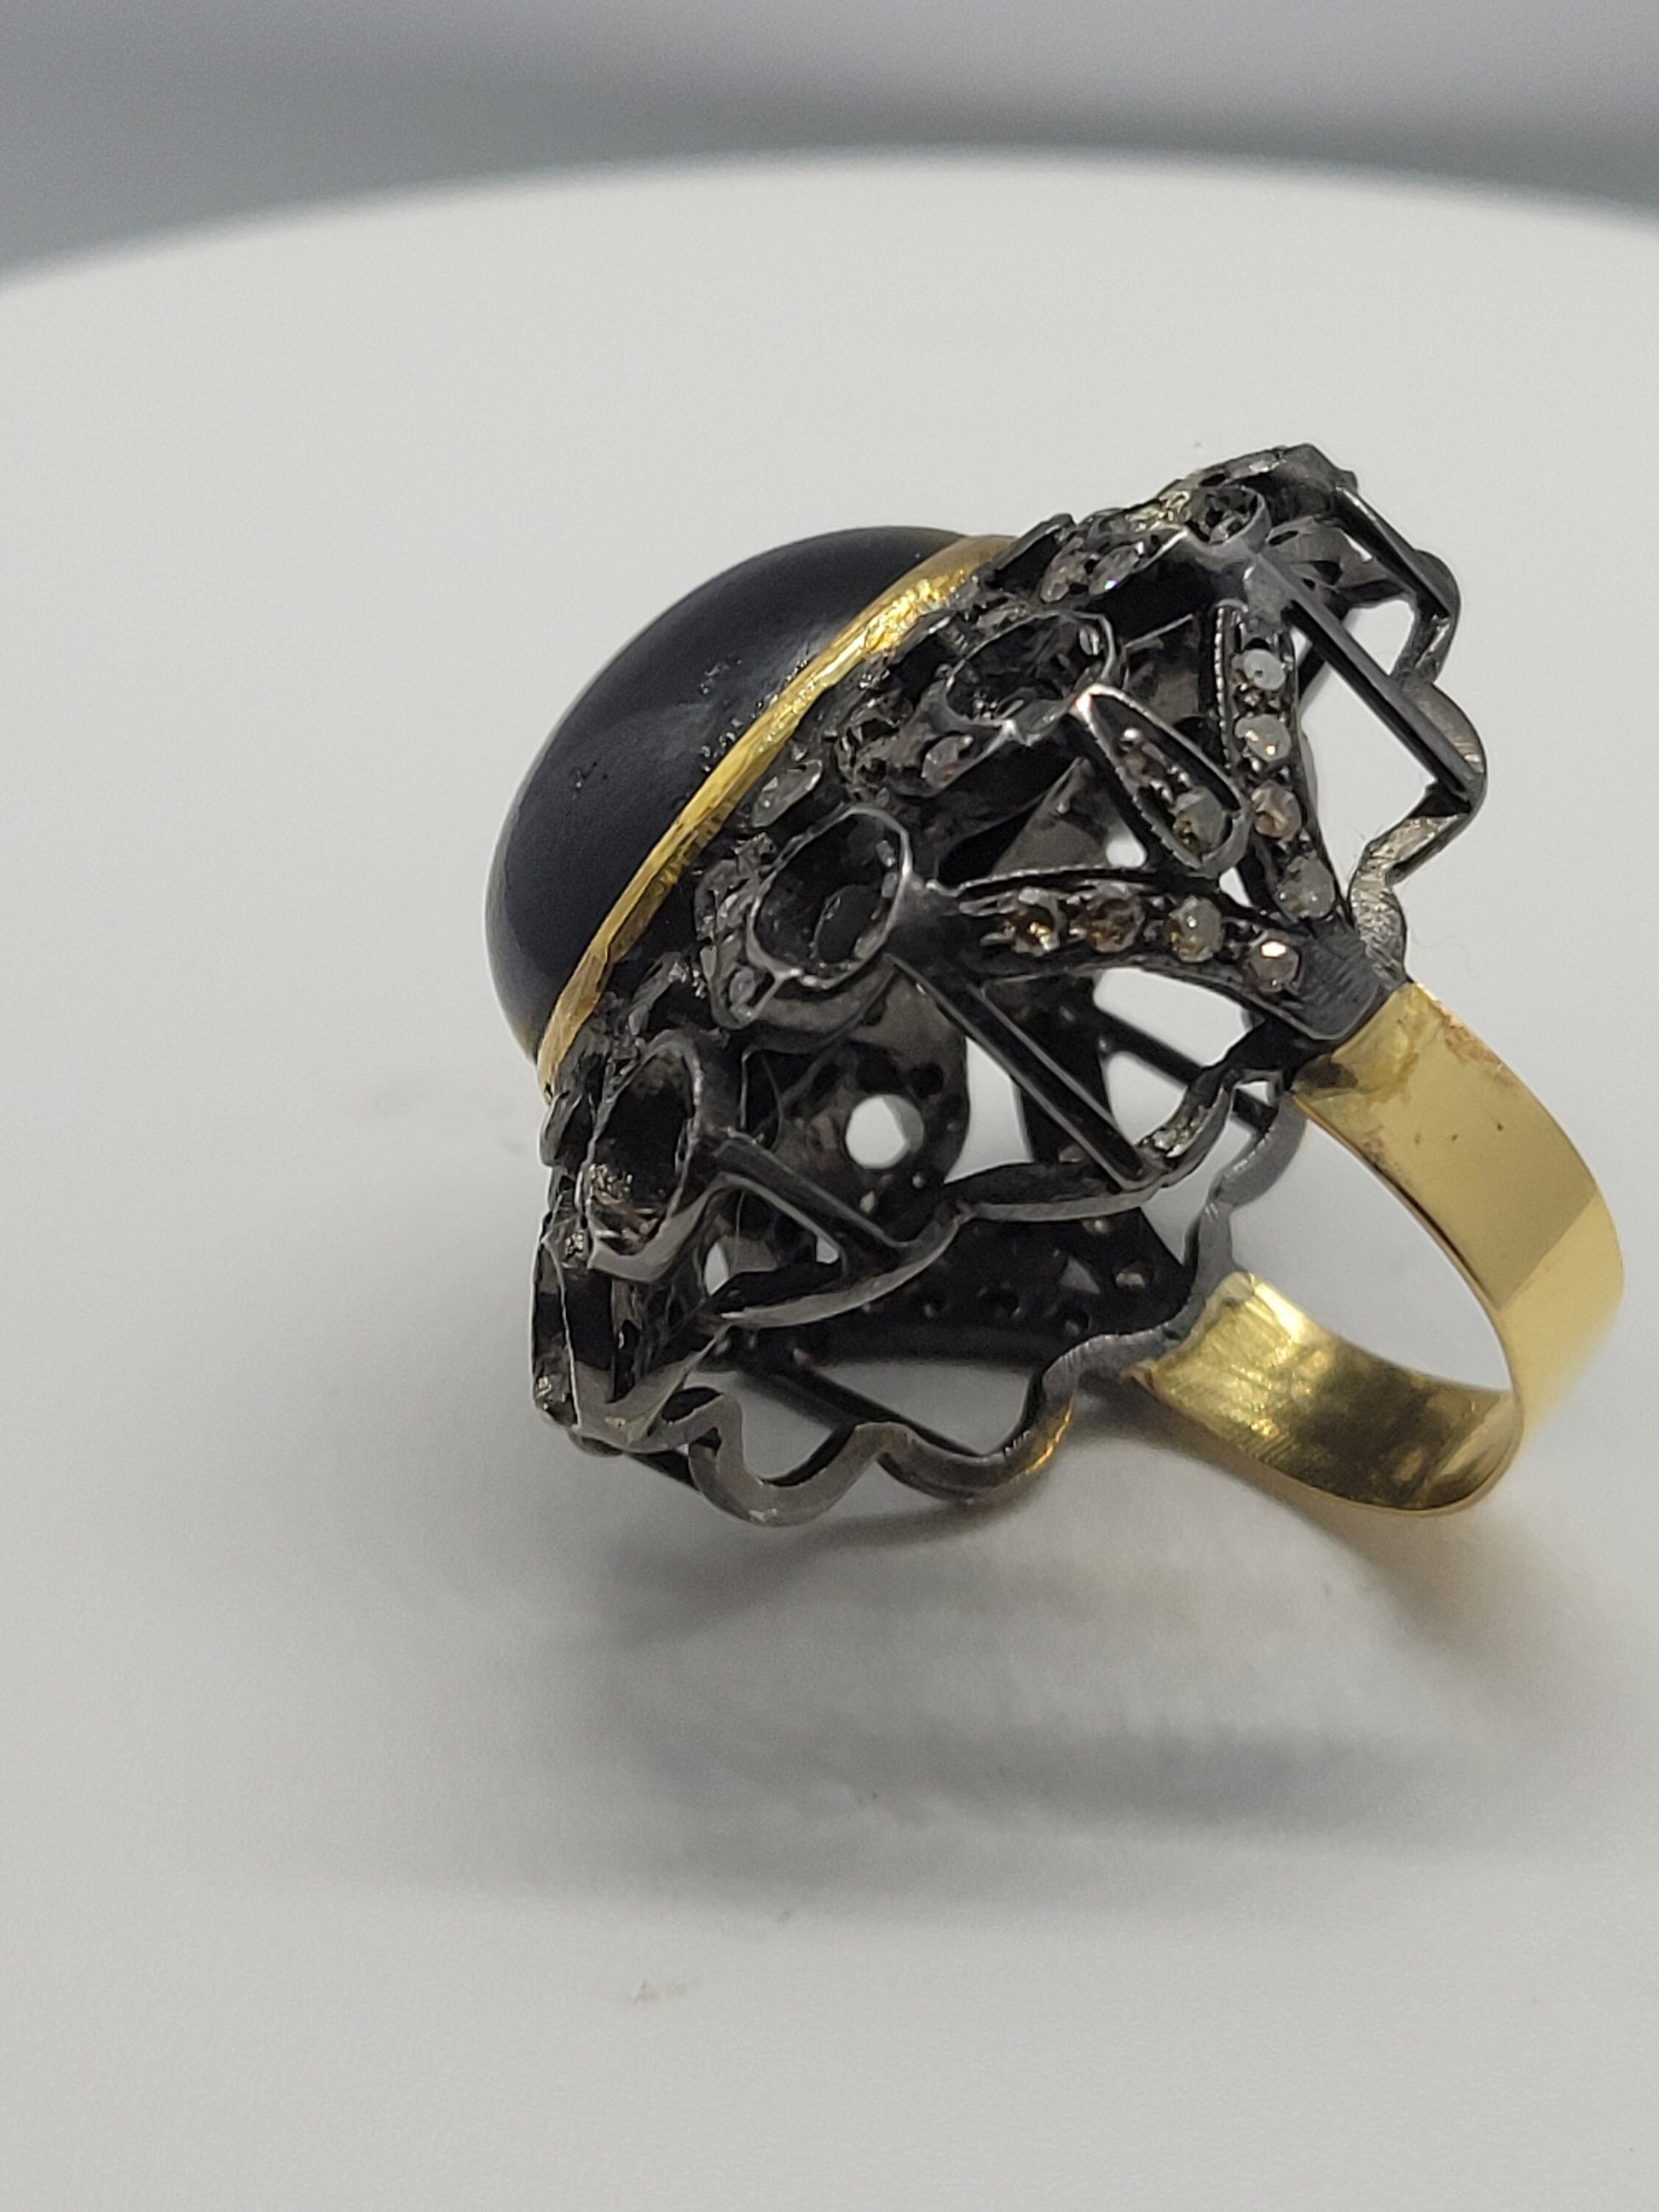 Vintage Black Star of India with Diamond in 925 Sterling Silver and 14k Gold Ring Genuine Star Diopside Genuine Diamond Revival Collection